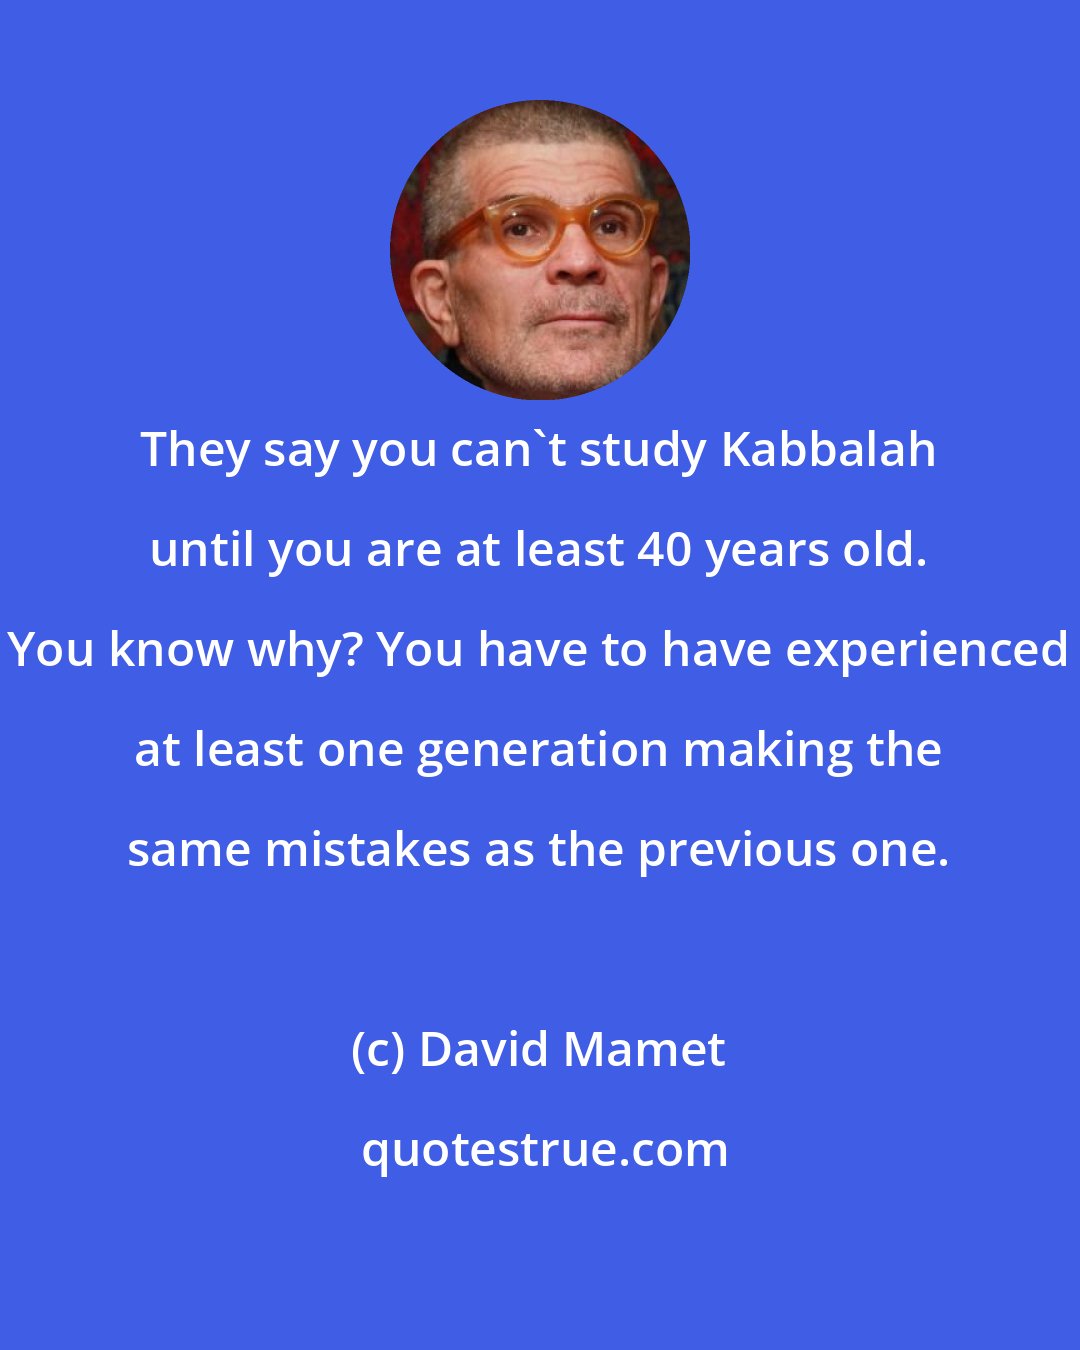 David Mamet: They say you can't study Kabbalah until you are at least 40 years old. You know why? You have to have experienced at least one generation making the same mistakes as the previous one.